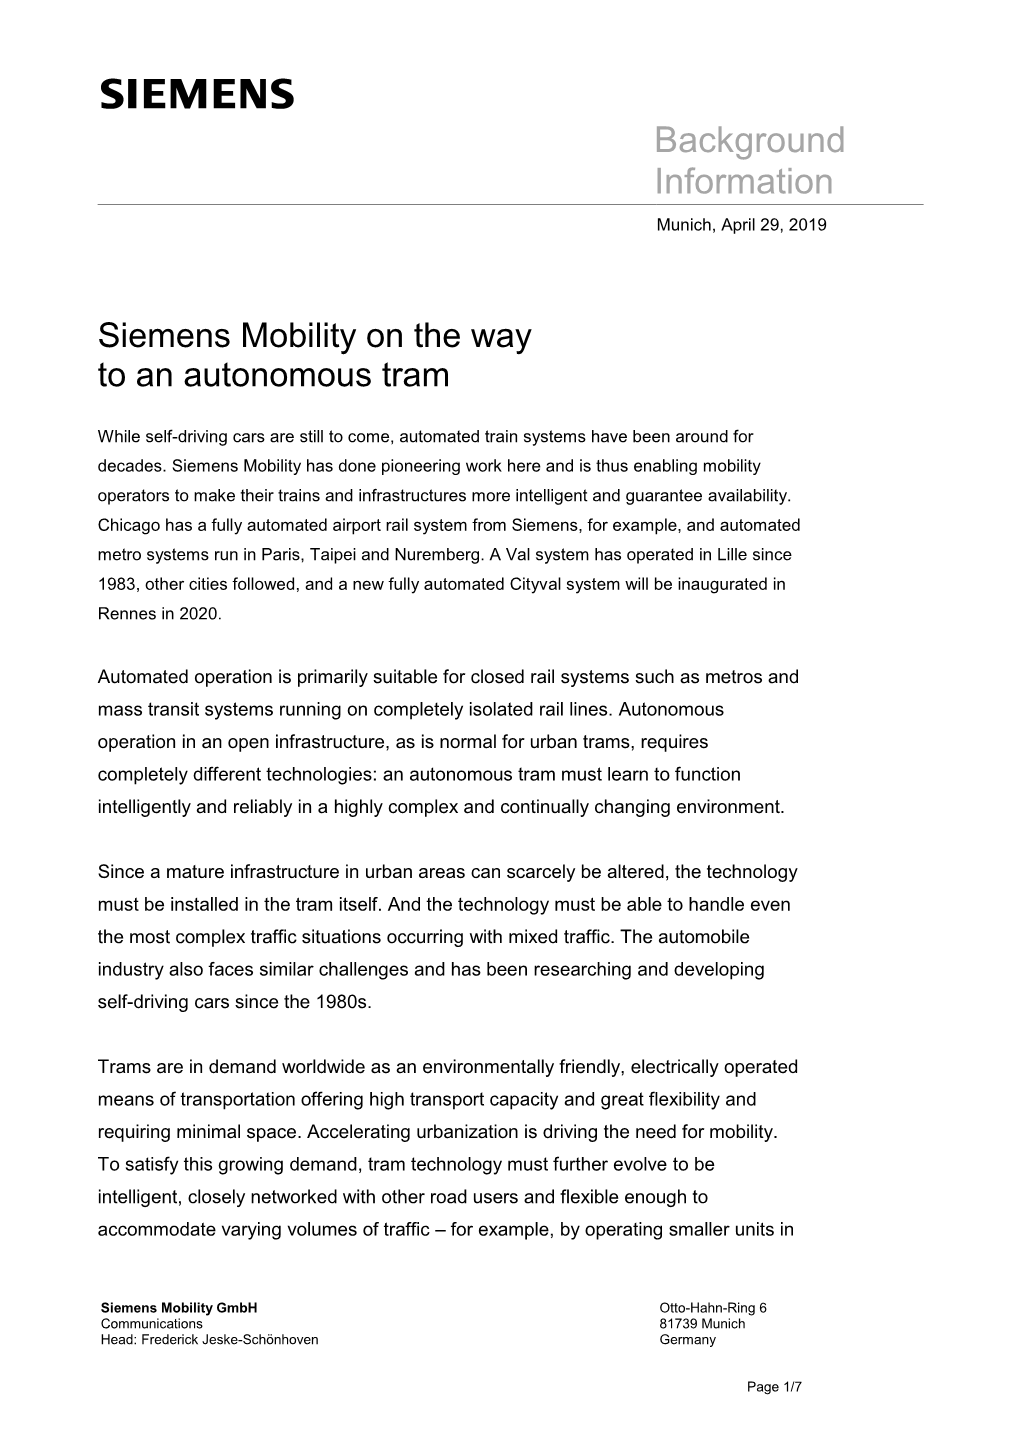 Background Information: Siemens Mobility on the Way to an Autonomous Tram